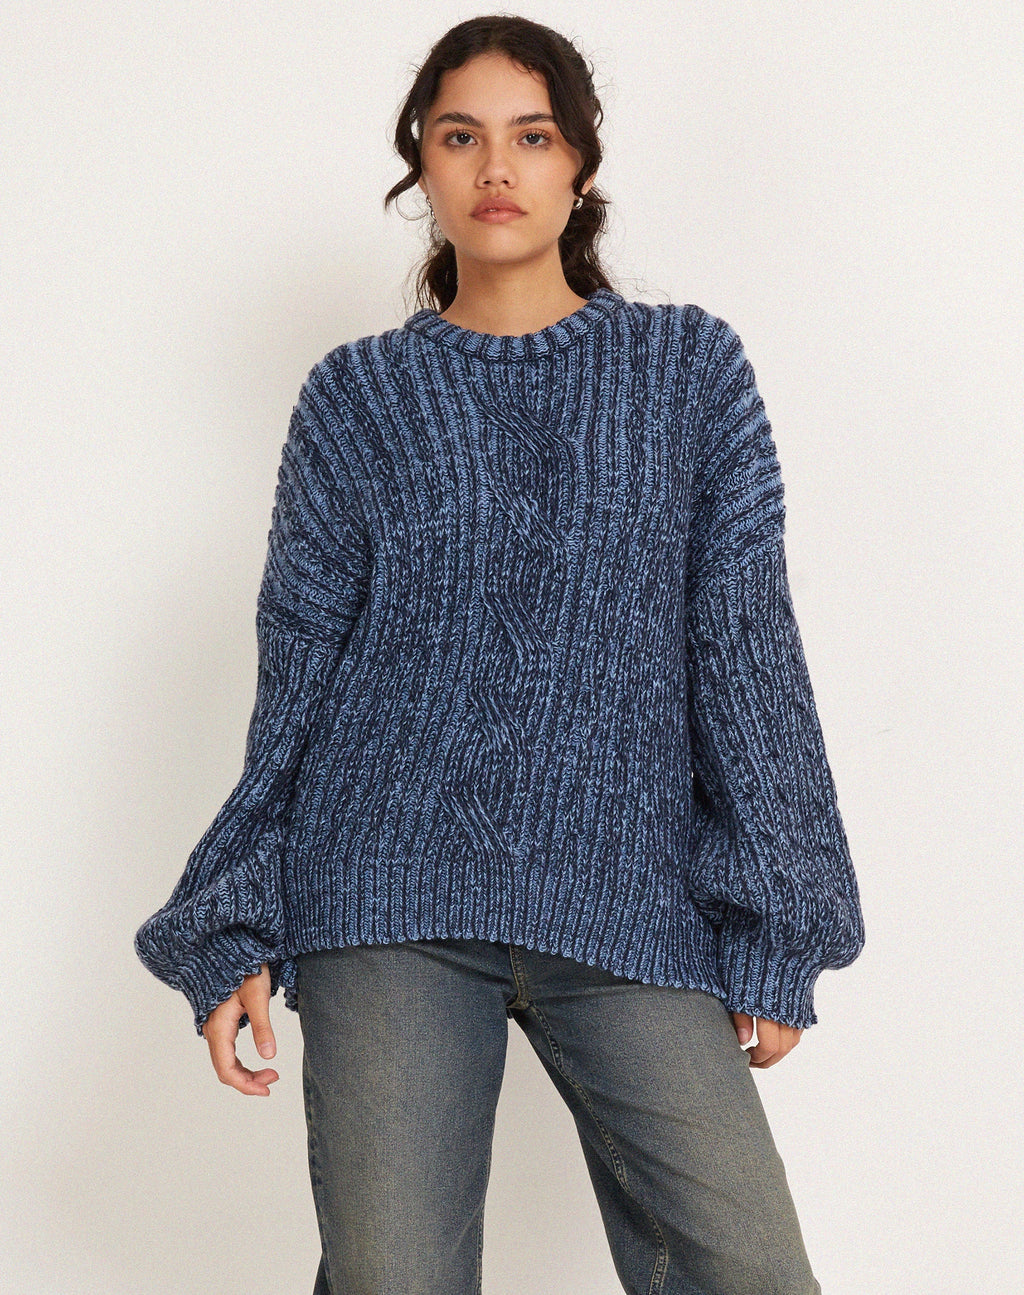 Amieta Knitted Jumper in Two Tone Blue